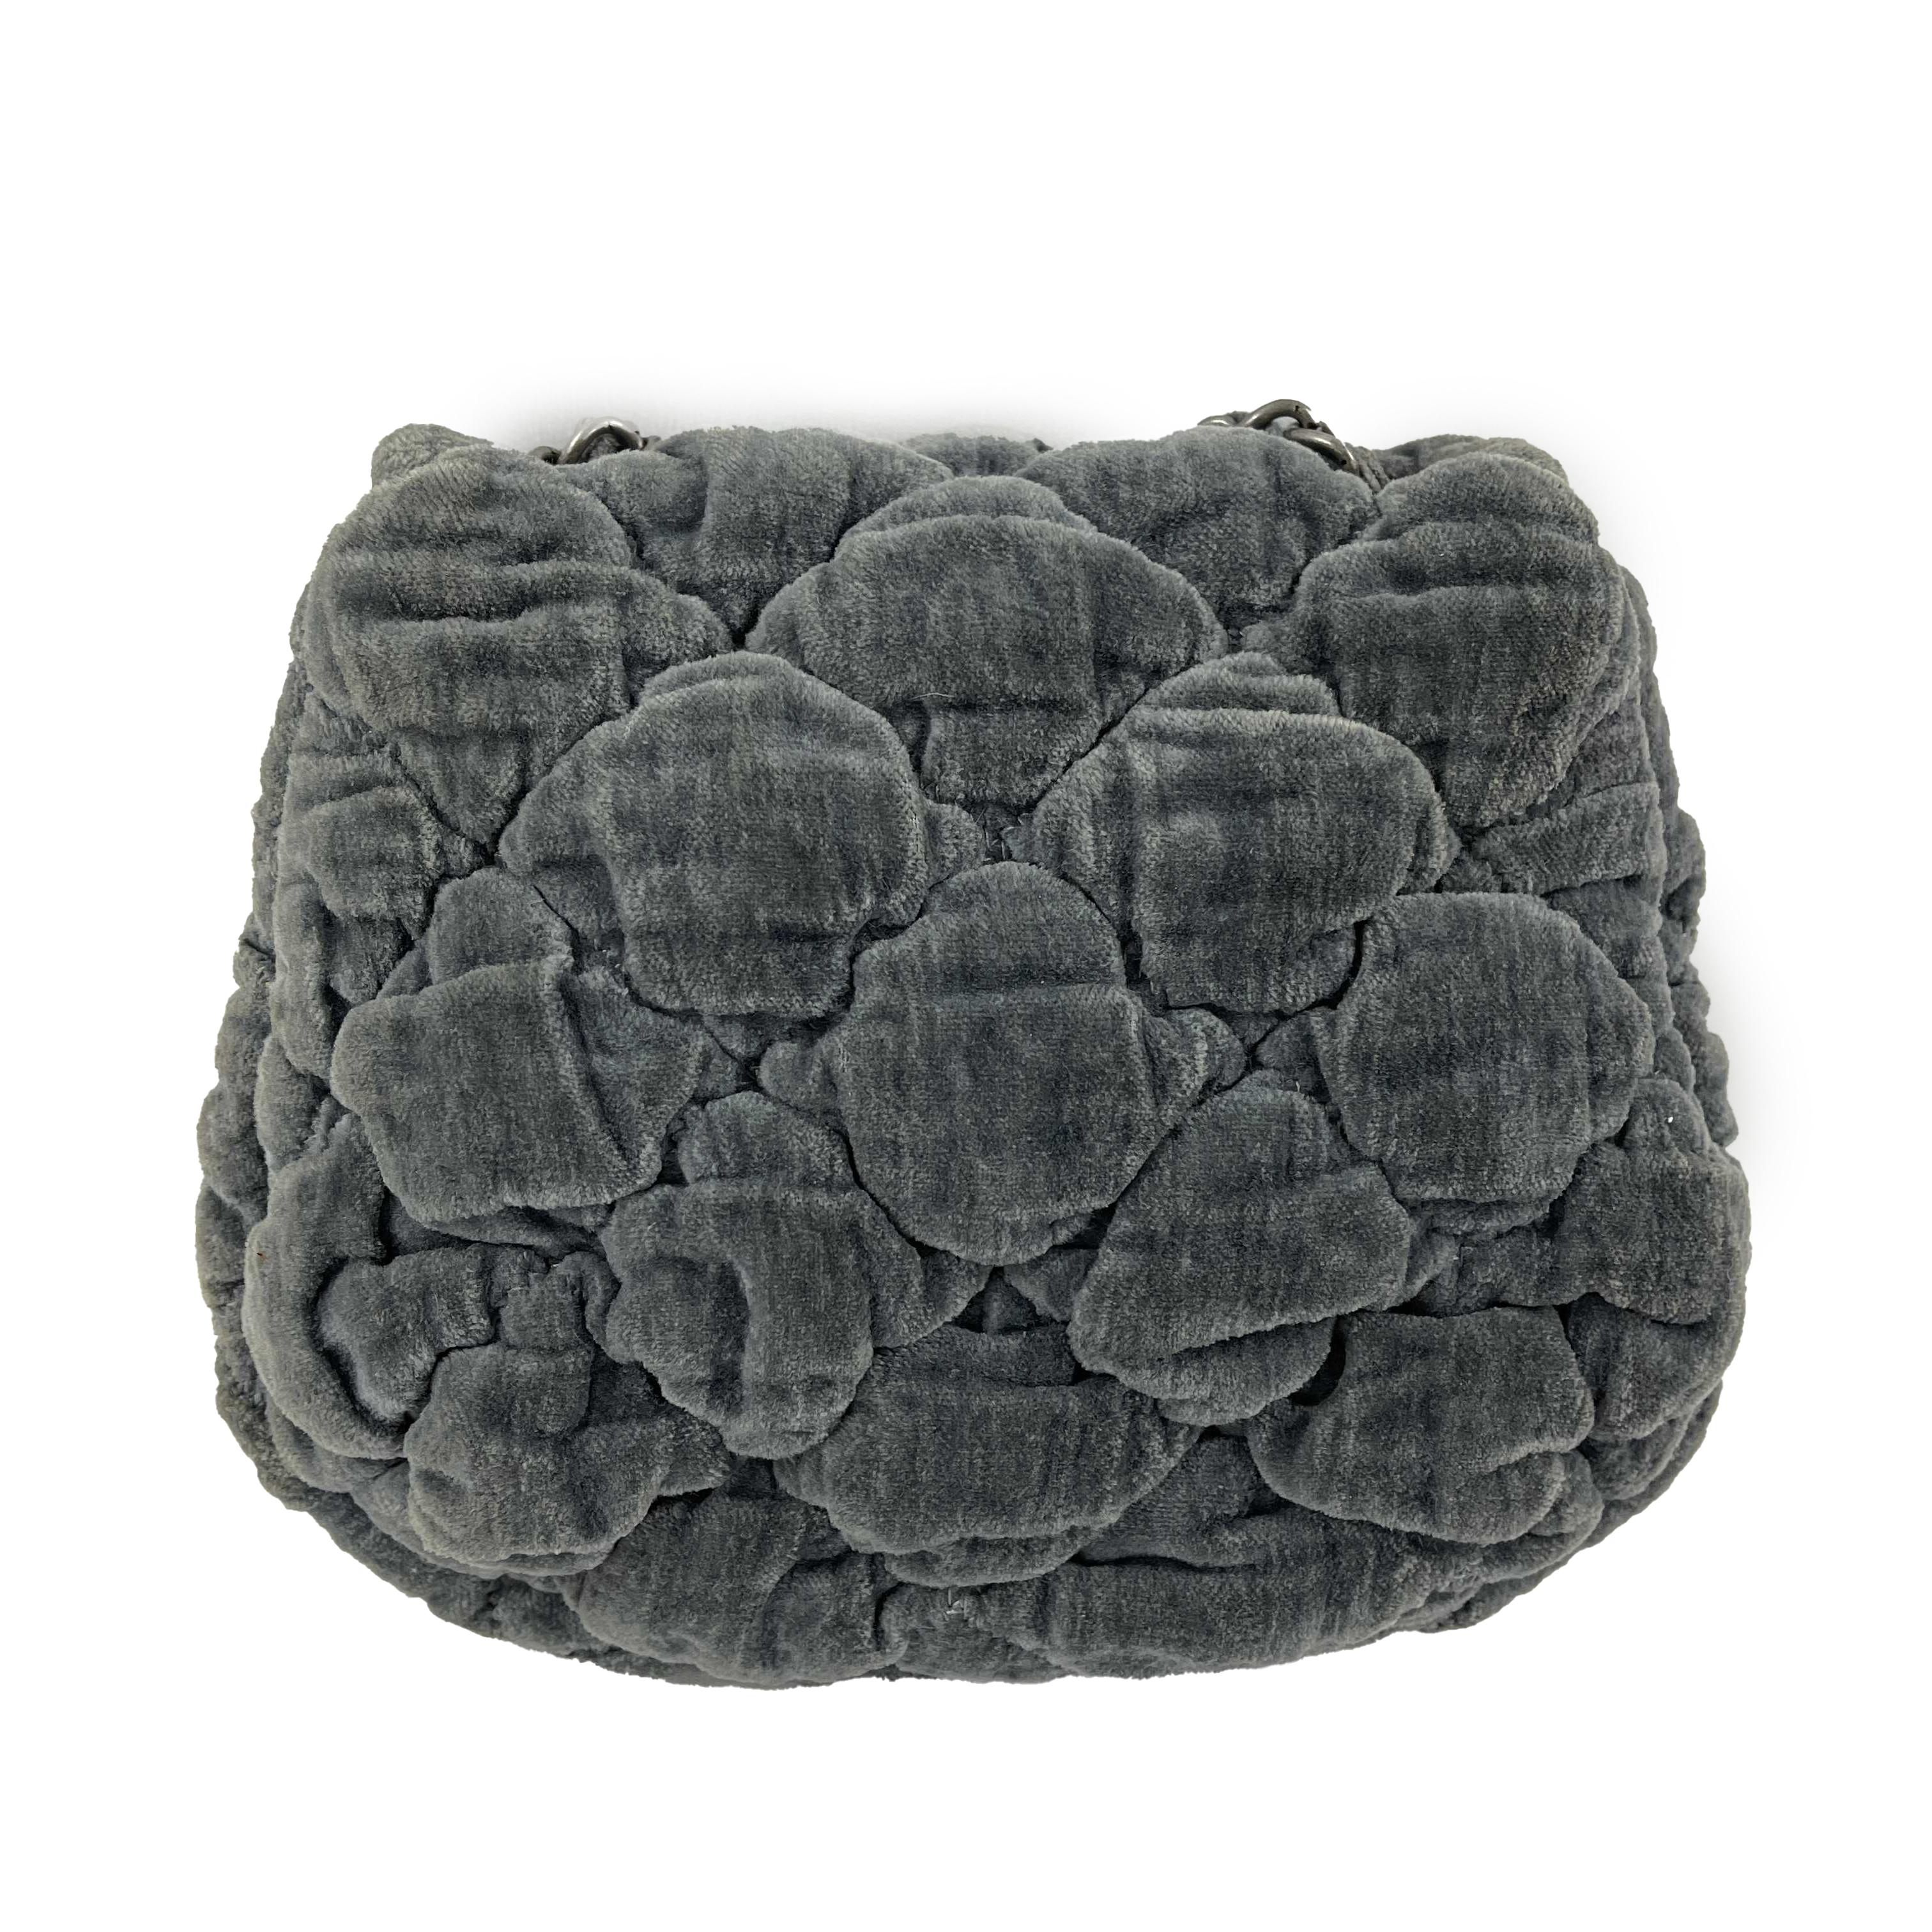 CHANEL - Quilted Gray CC Velour Mini Flap Crossbody / Shoulder Bag 

Description

From the 2008 collection.
This Chanel crossbody handbag is crafted with gray quilted velour fabric.
The front flaps features a black and silver-toned interlocking CC